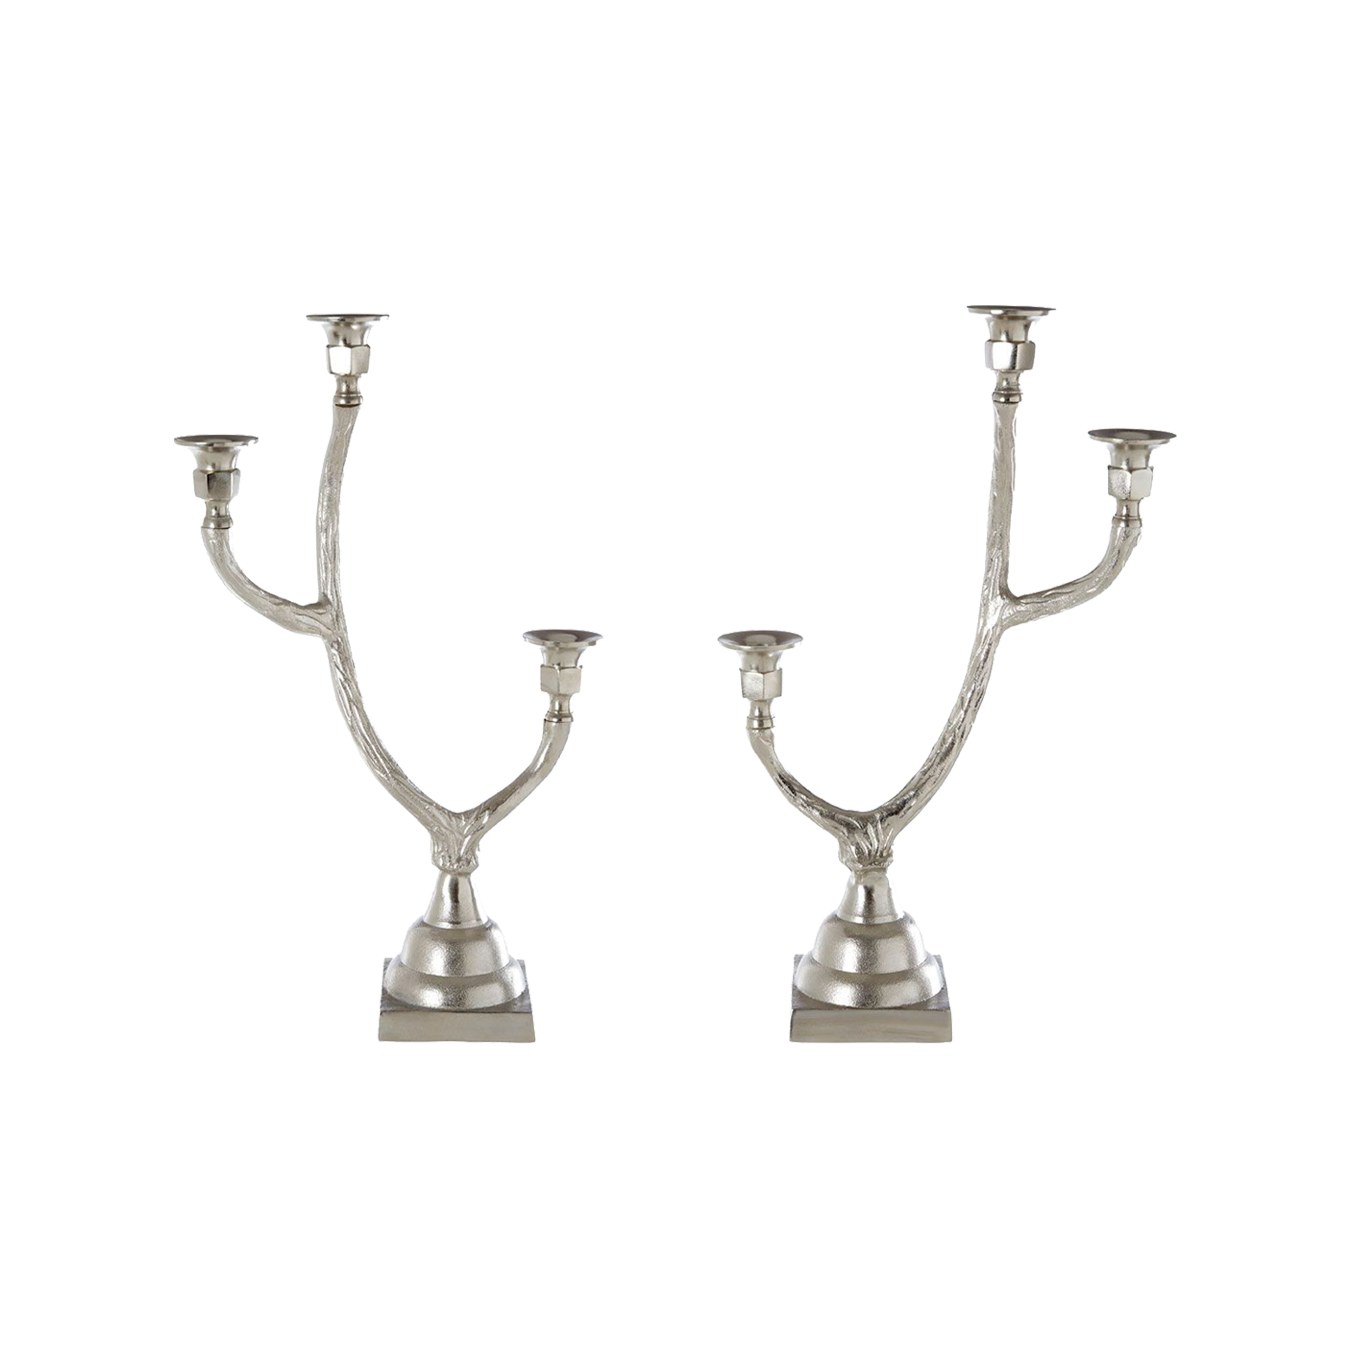 Set of 2 Antler Candle holders